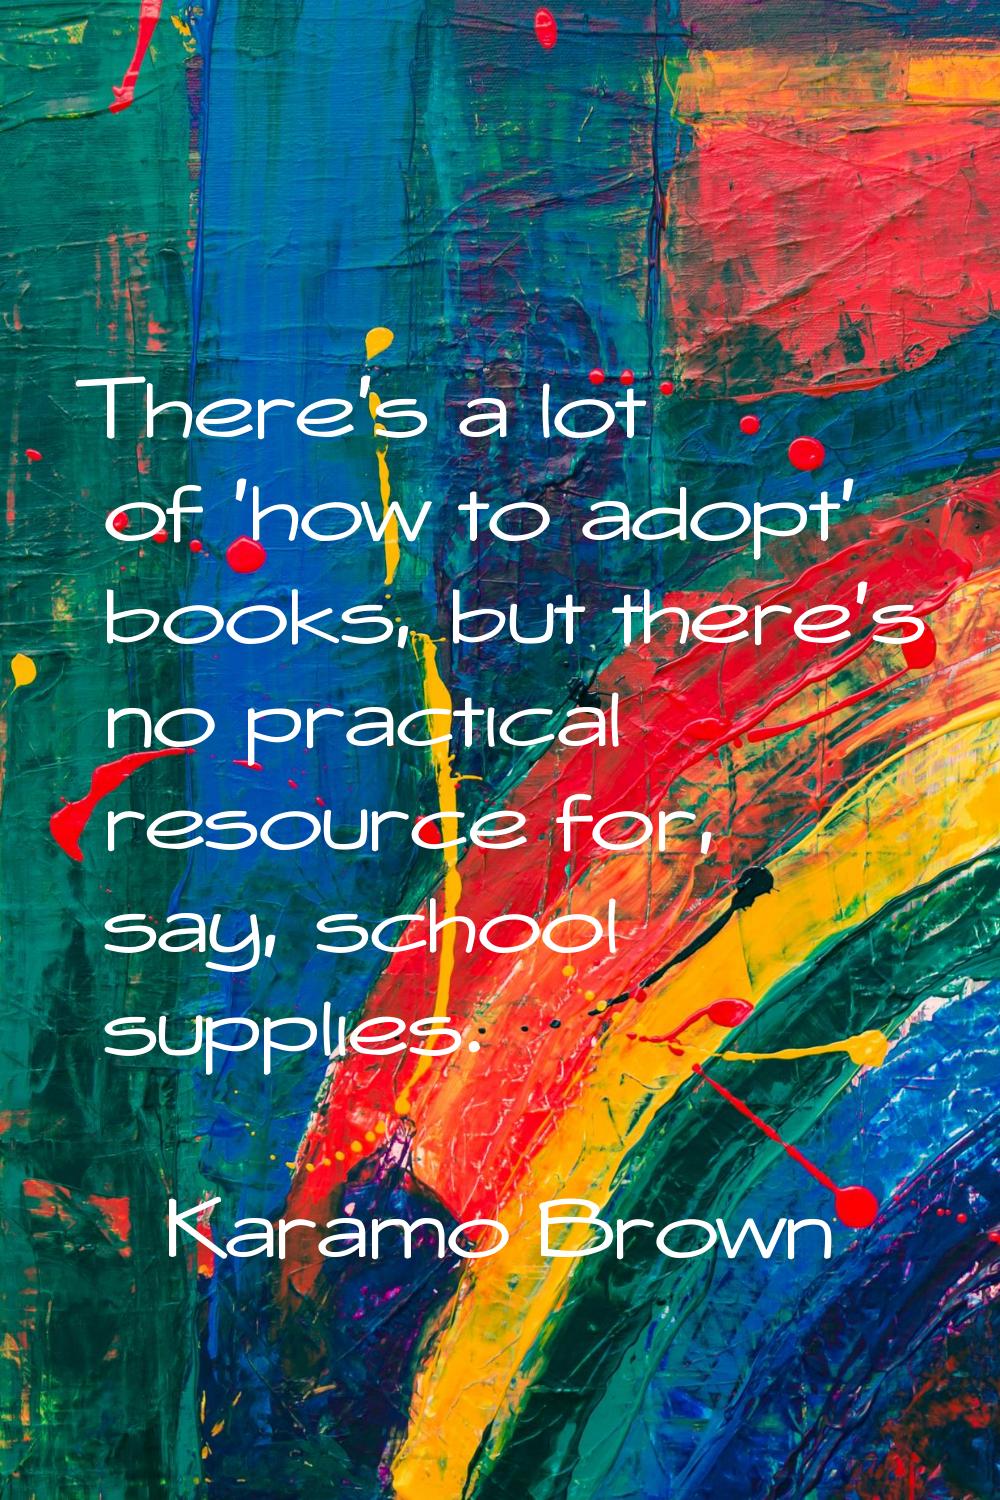 There's a lot of 'how to adopt' books, but there's no practical resource for, say, school supplies.